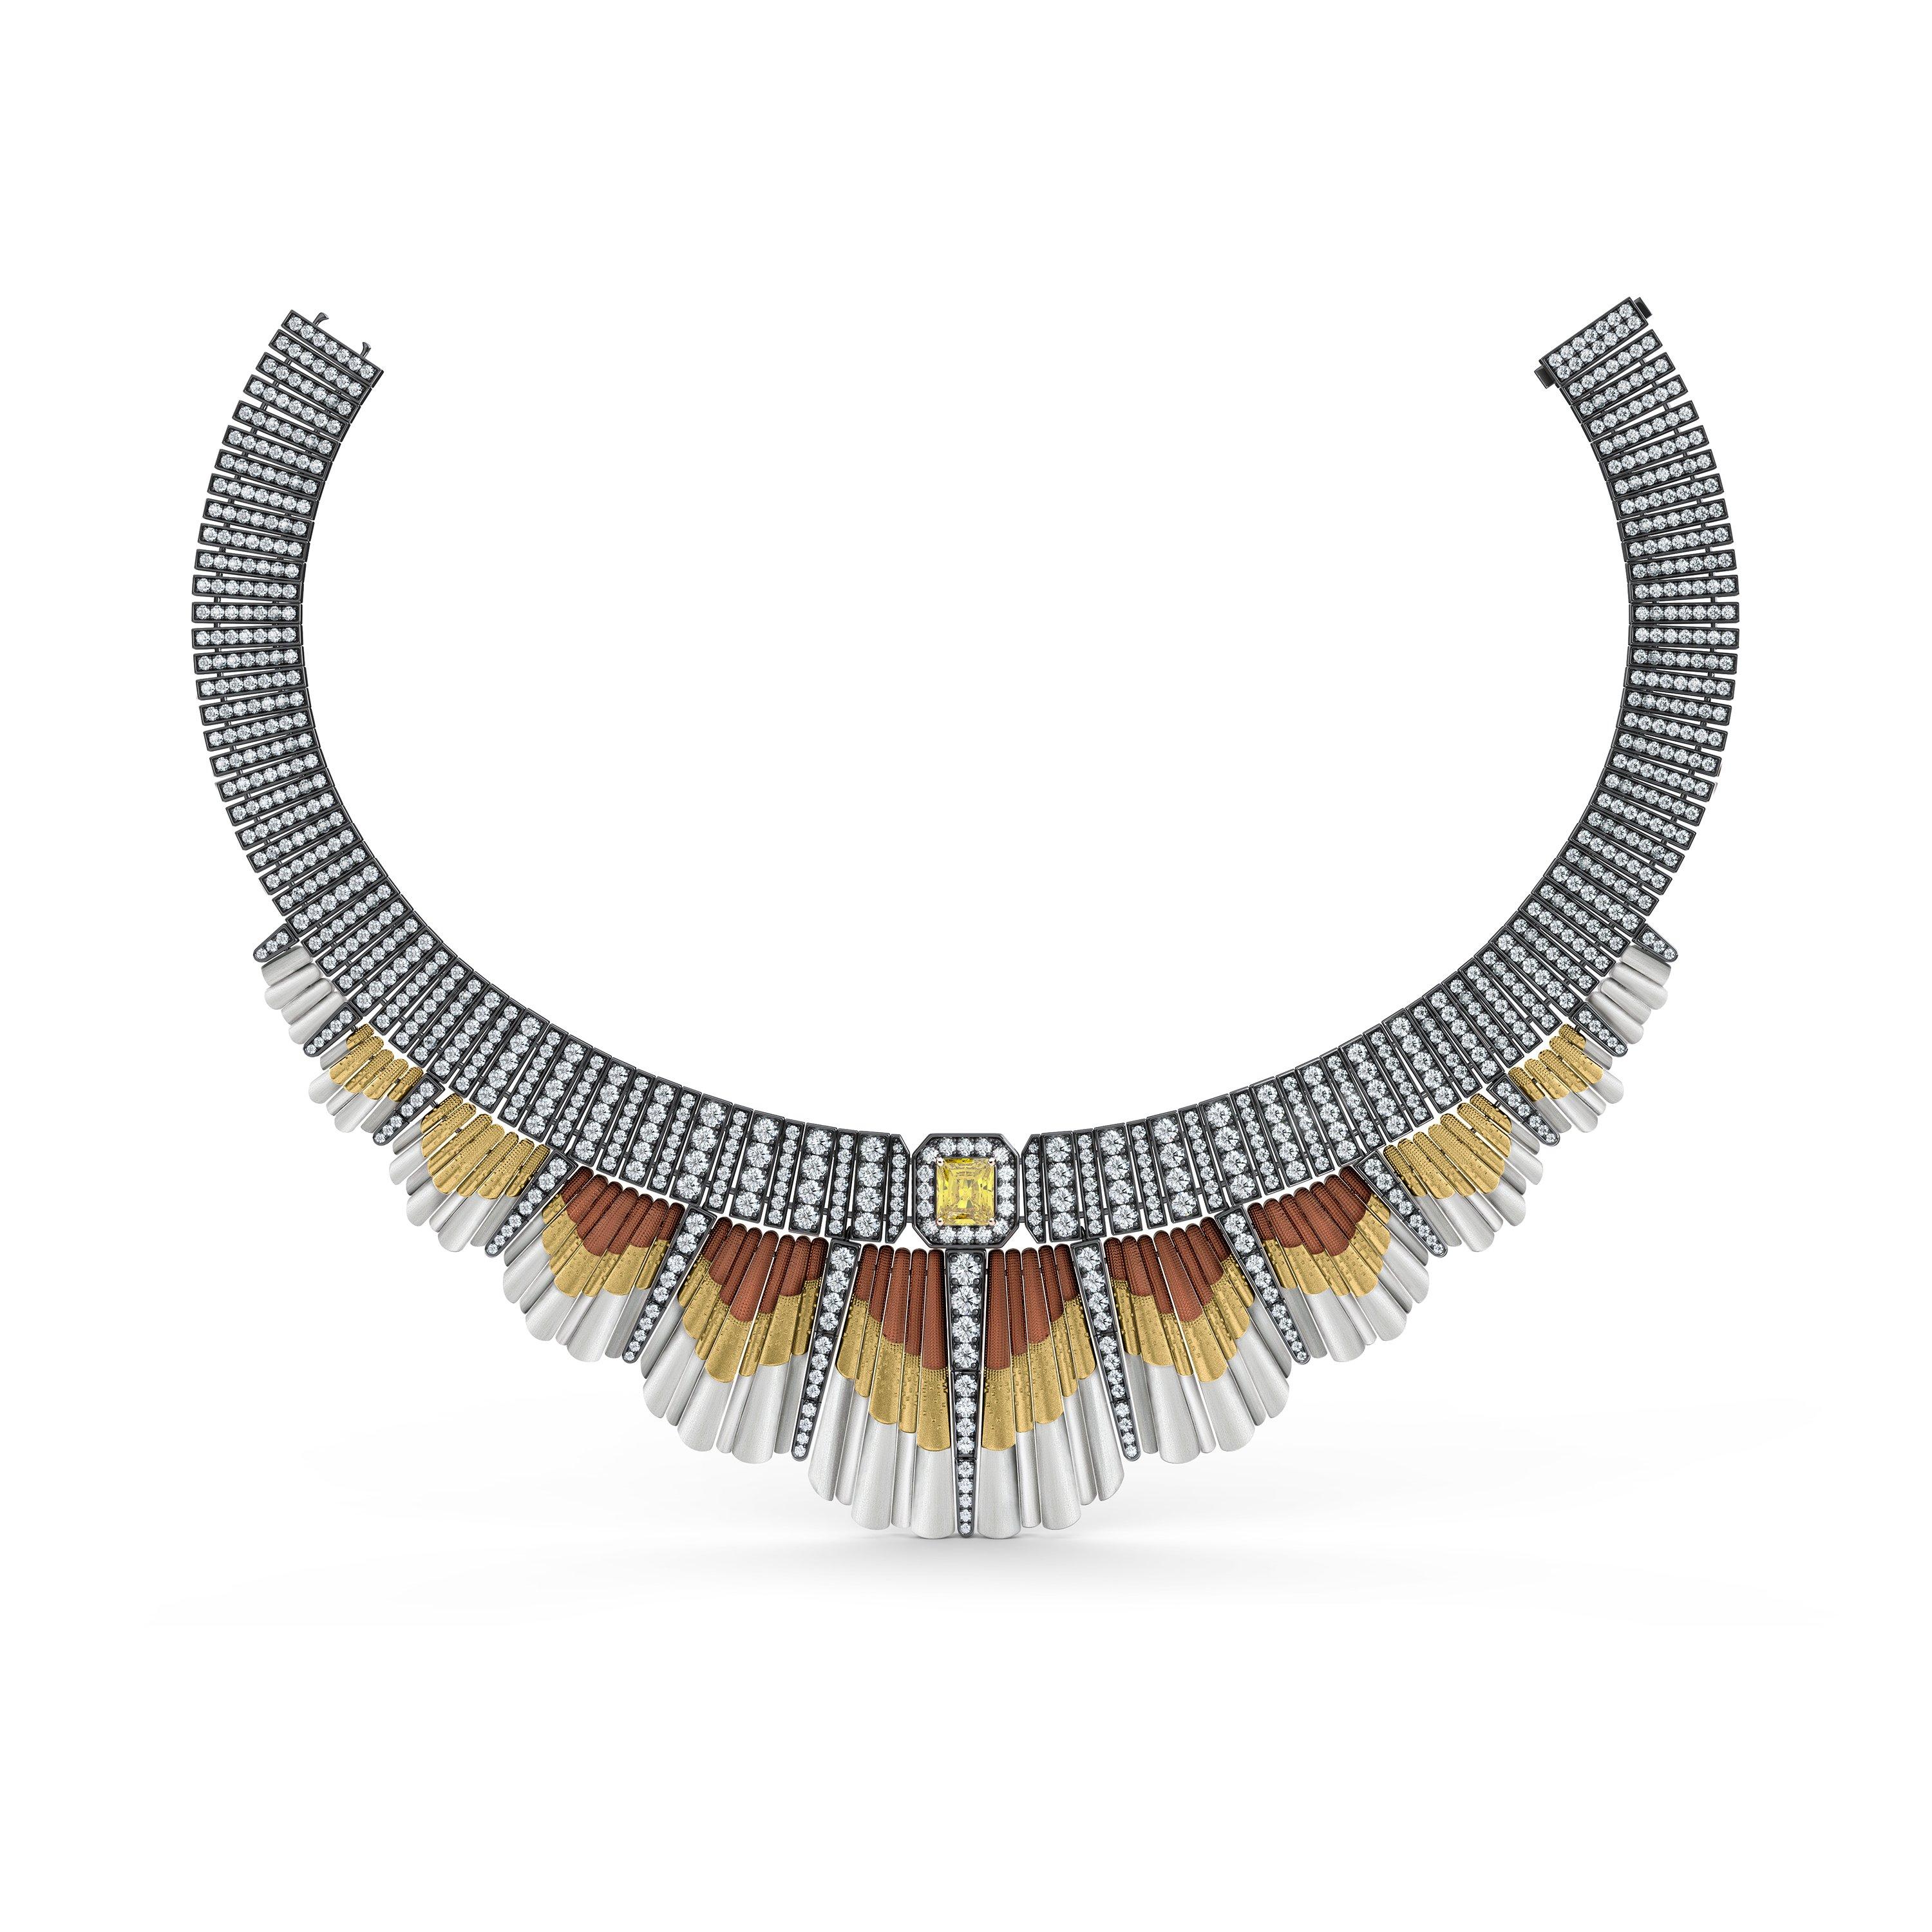 Soothing Lotus rough and cut diamond necklace, De Beers